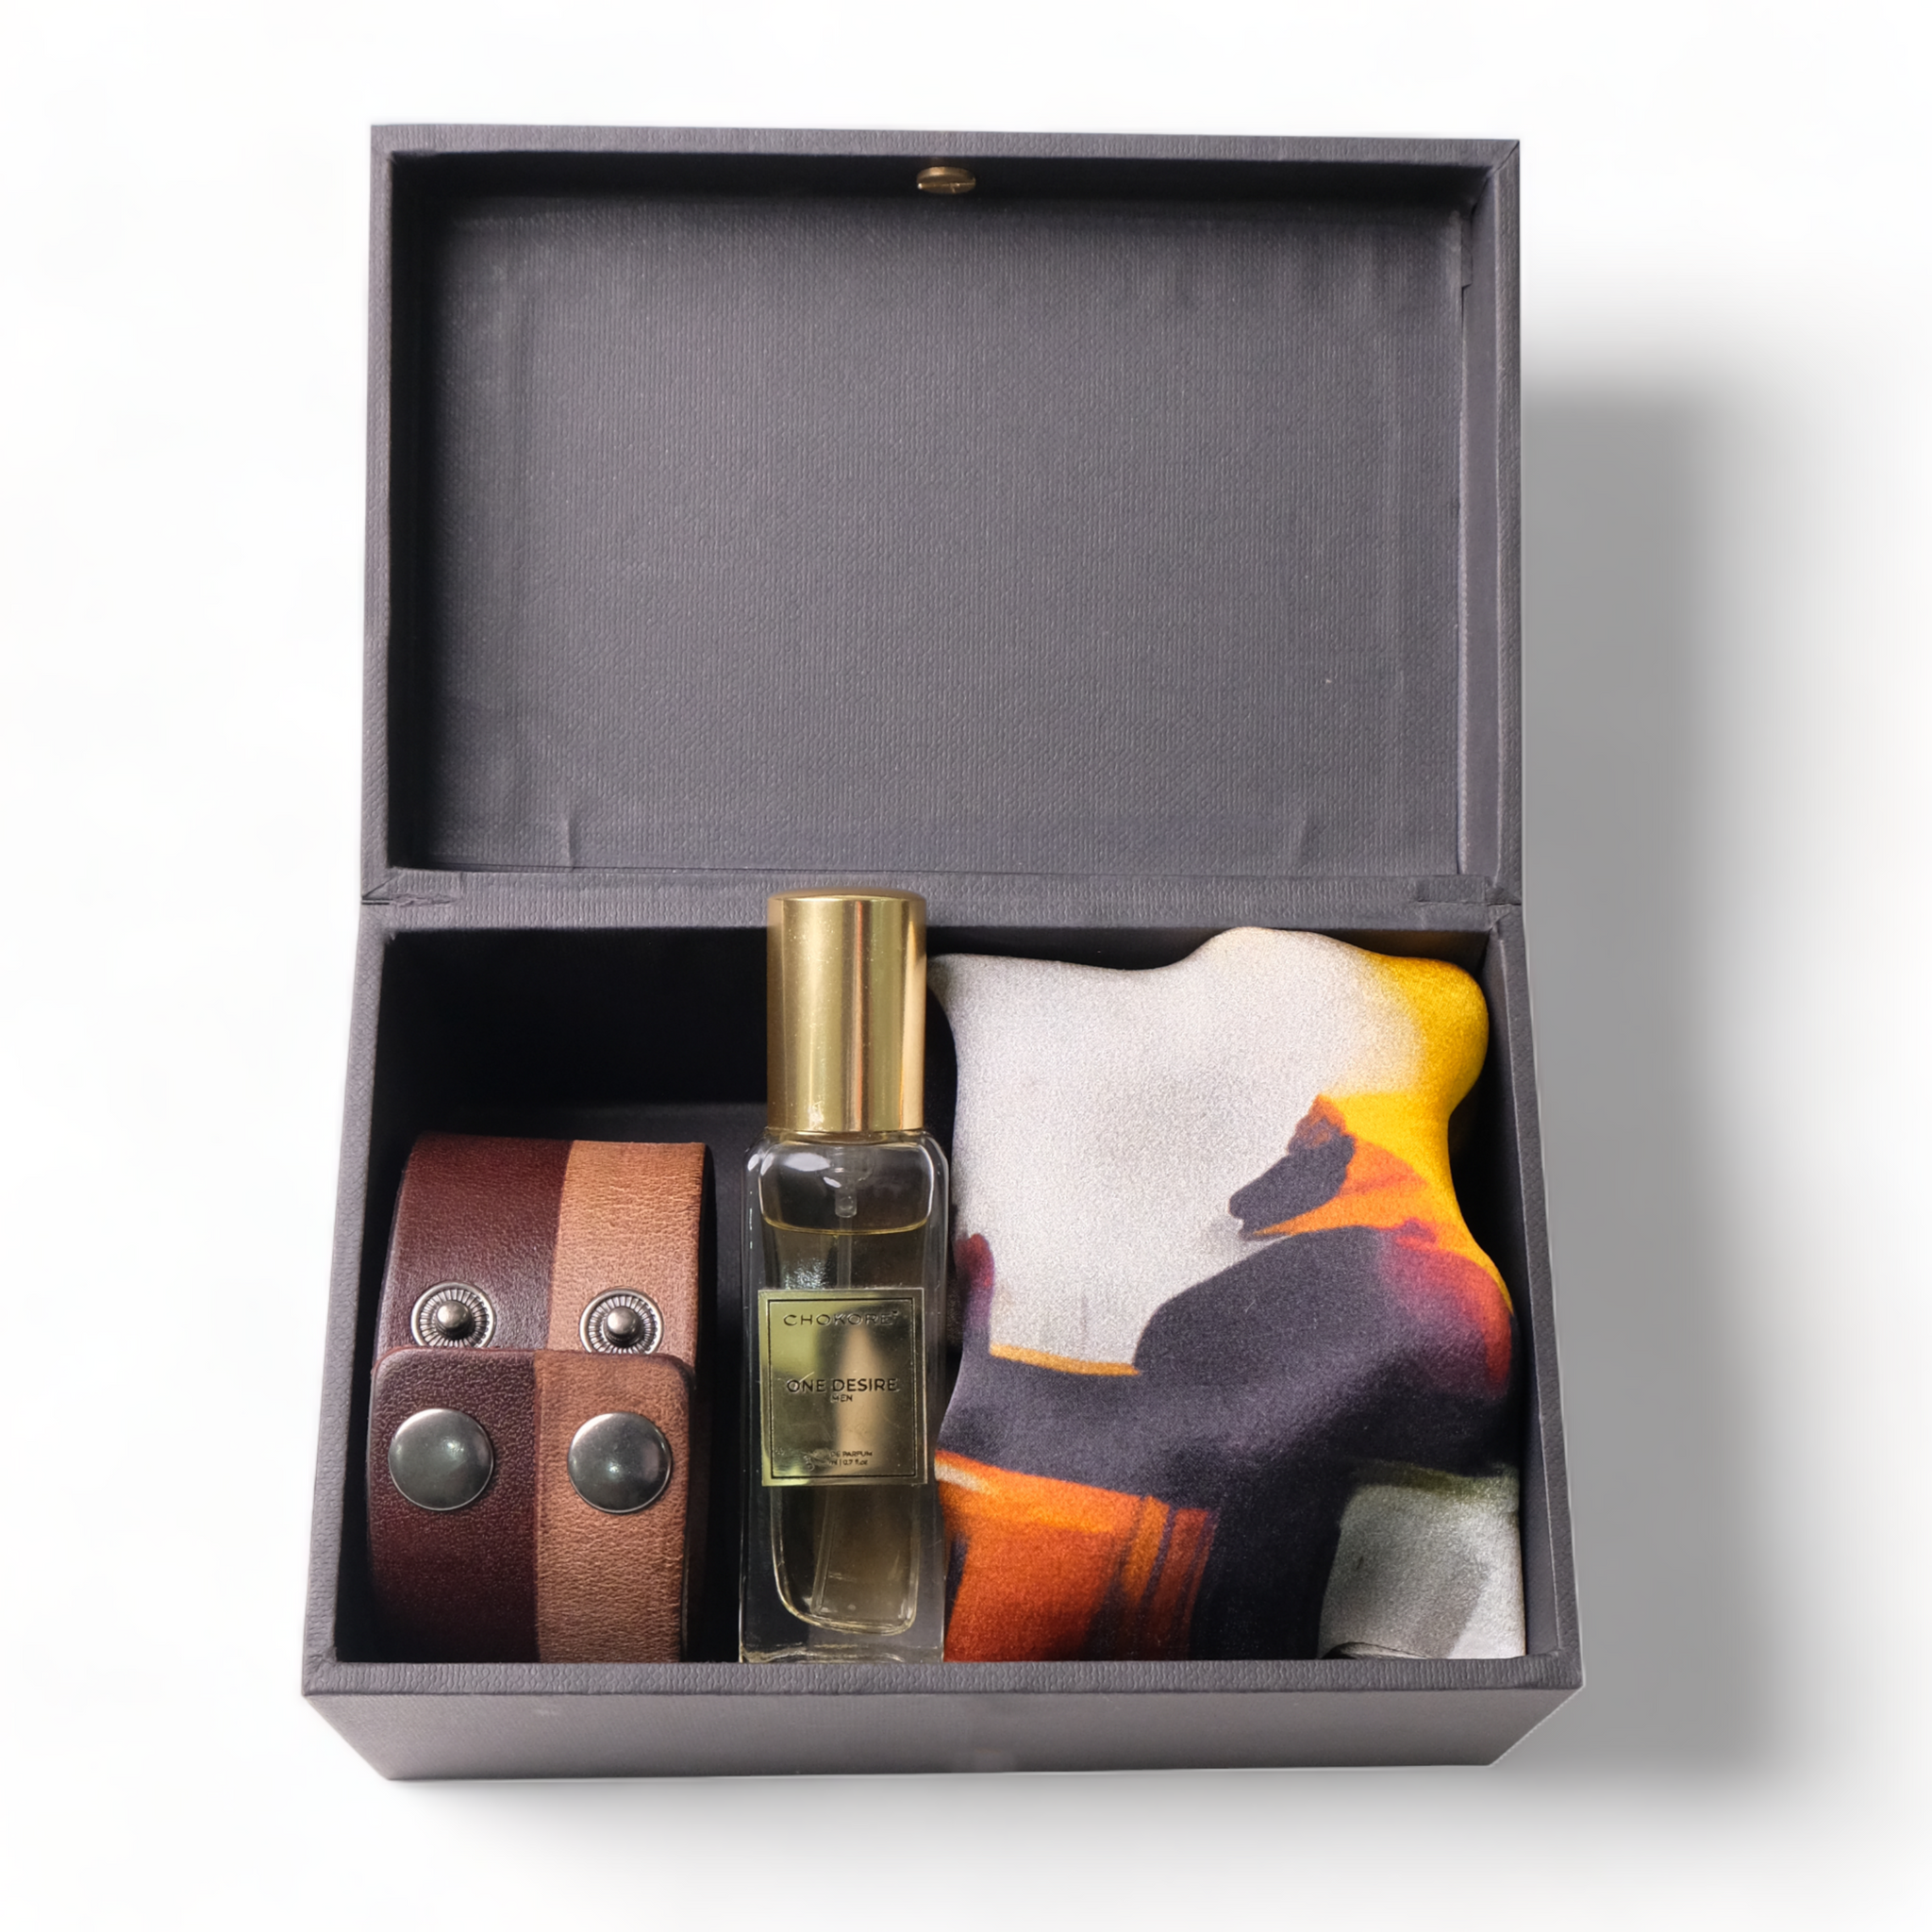 Chokore Special 3-in-1 Gift Set for Him (Lucknow Pocket Square, Leather Bracelet, & 20 ml One Desire Perfume)